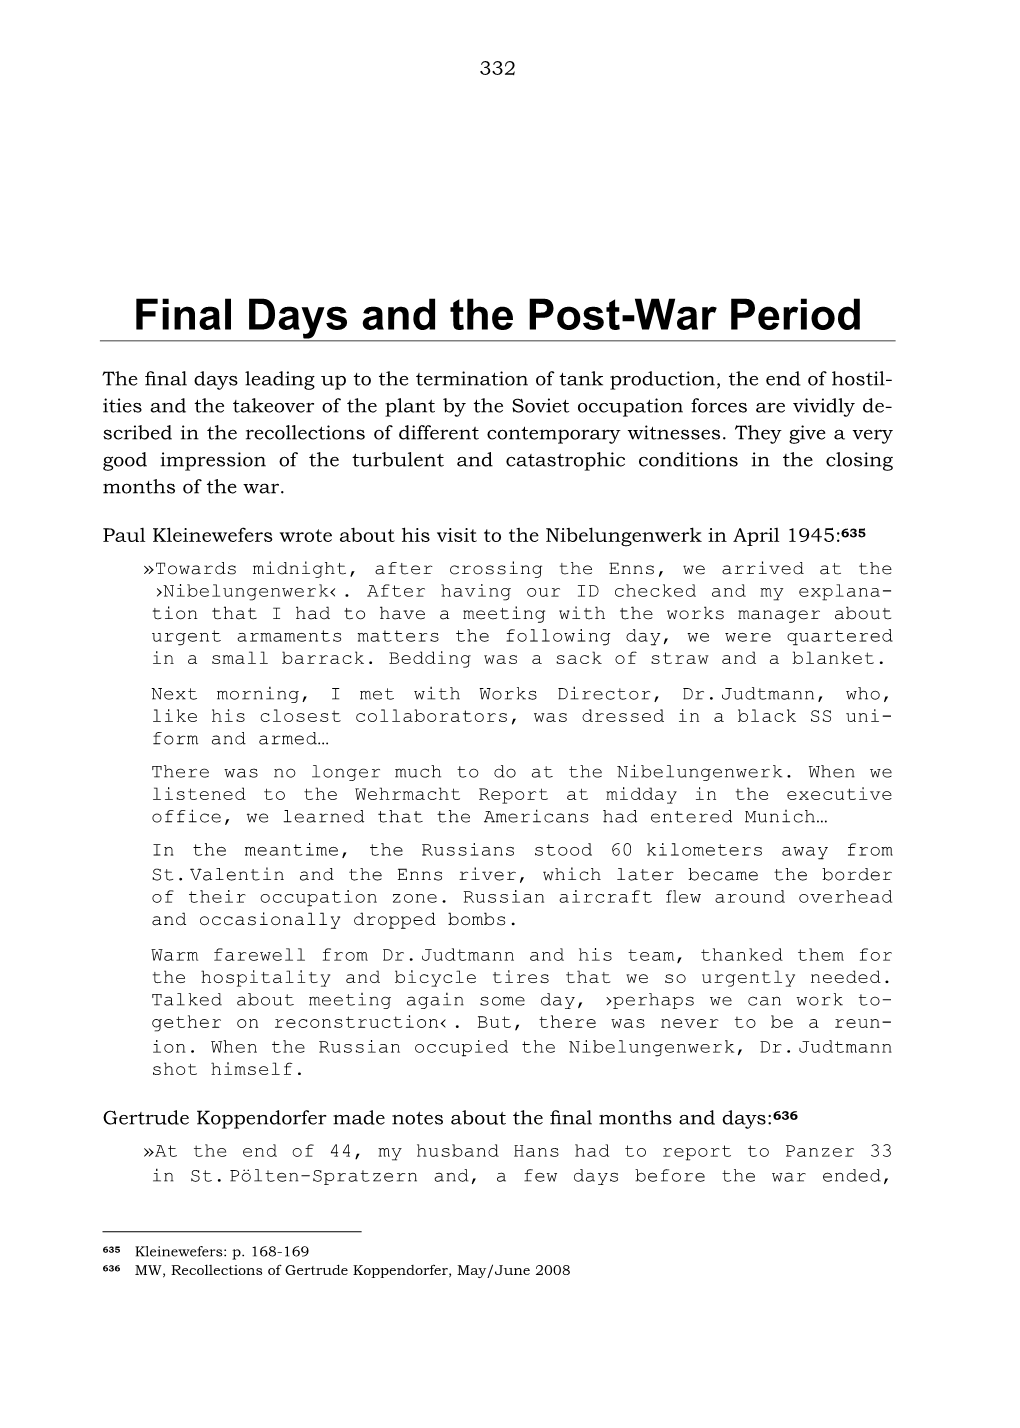 Final Days and the Post-War Period